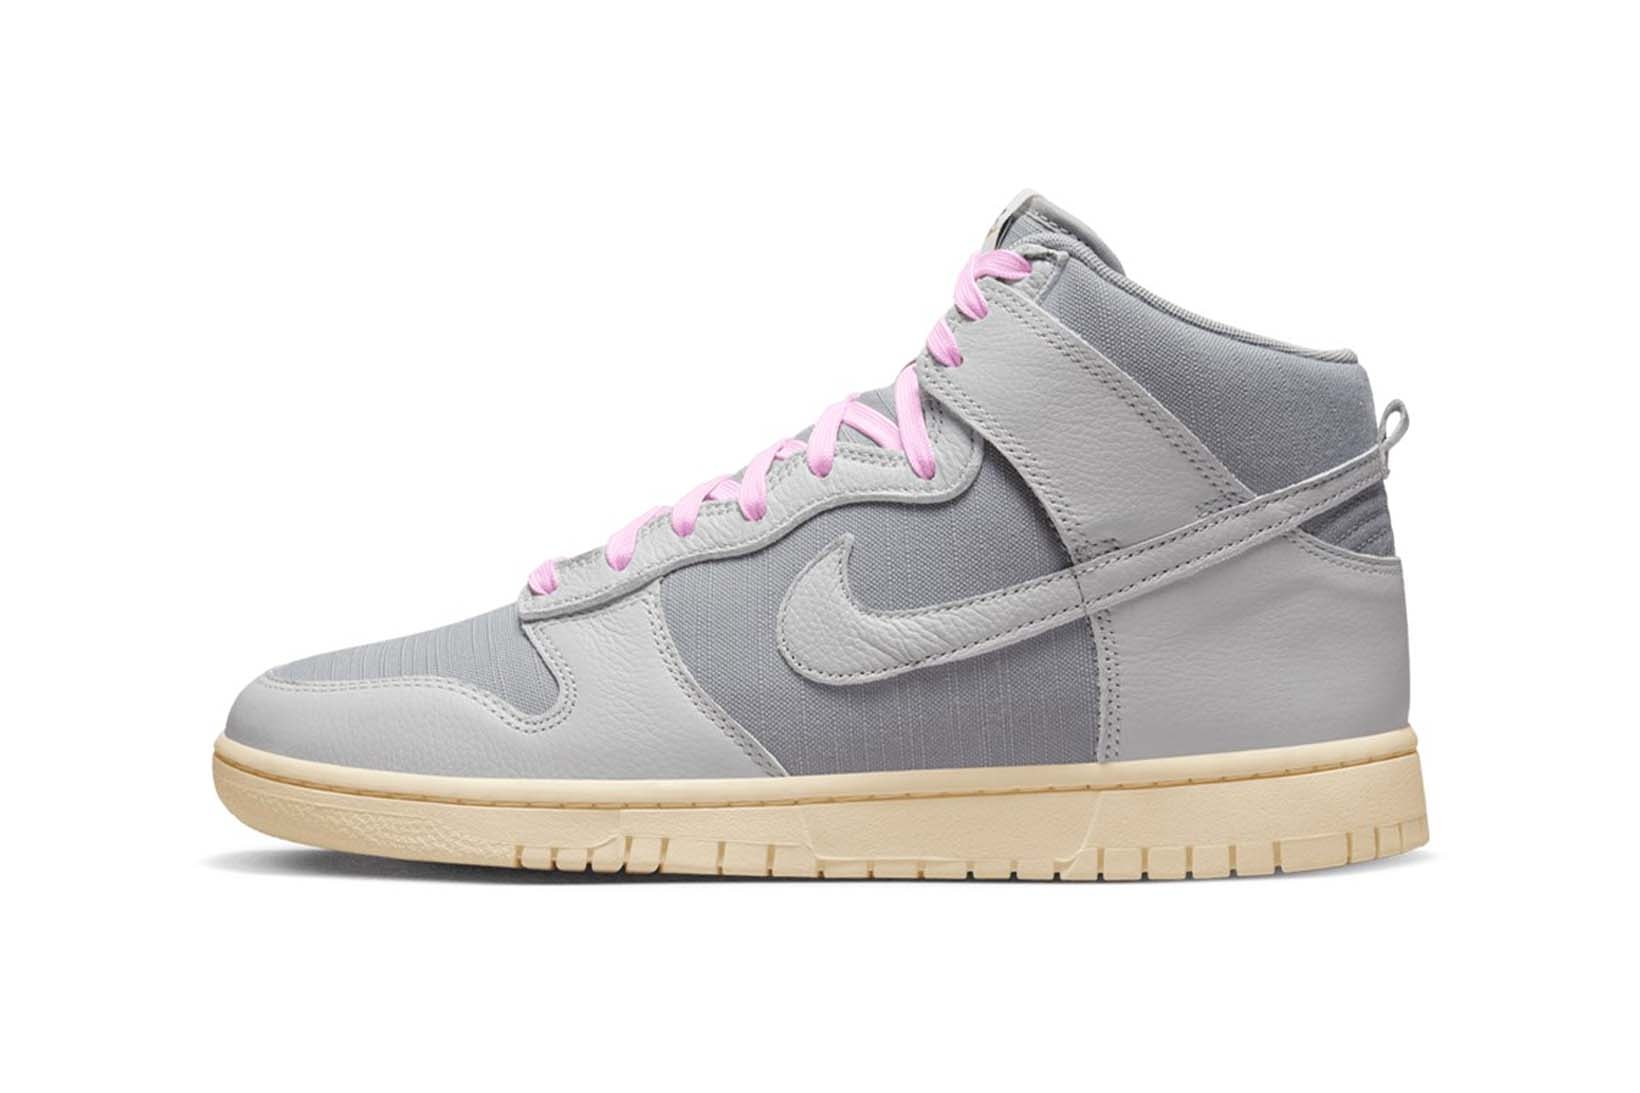 nike dunk high vintage particle grey certified fresh DQ8800-001 price release info